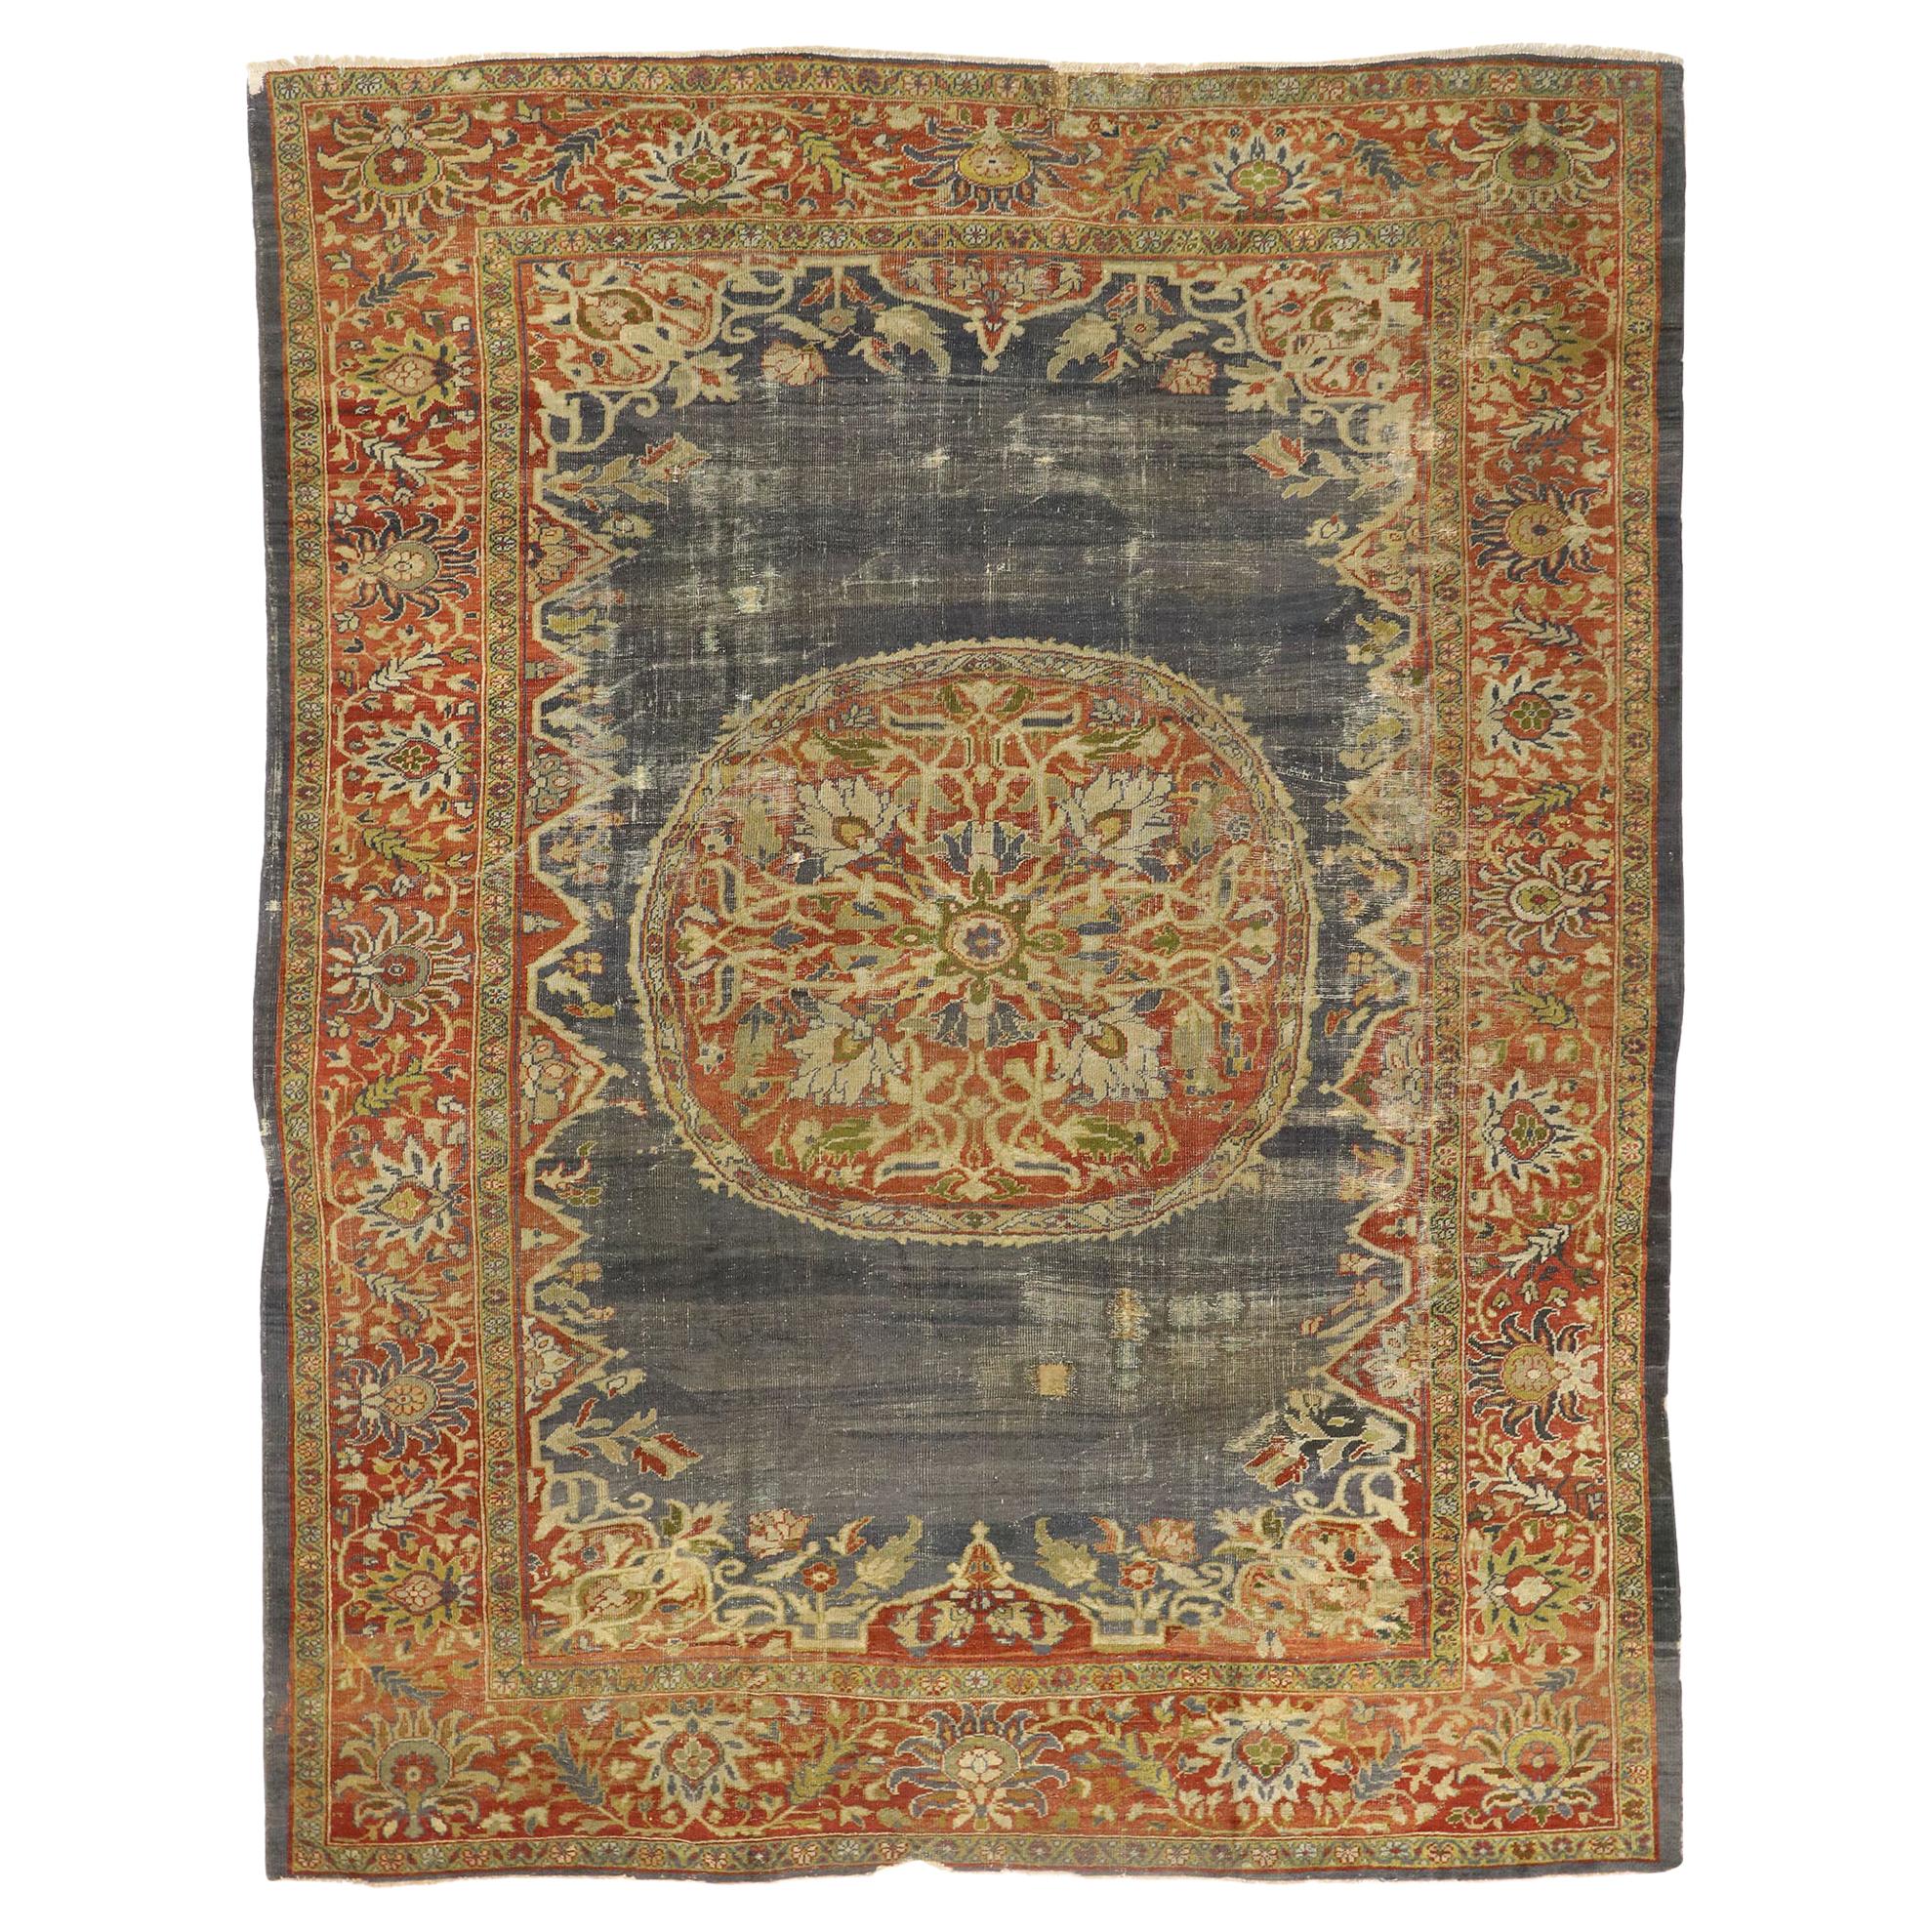 Distressed Antique Persian Sultanabad Rug with Rustic Artisan Industrial Style